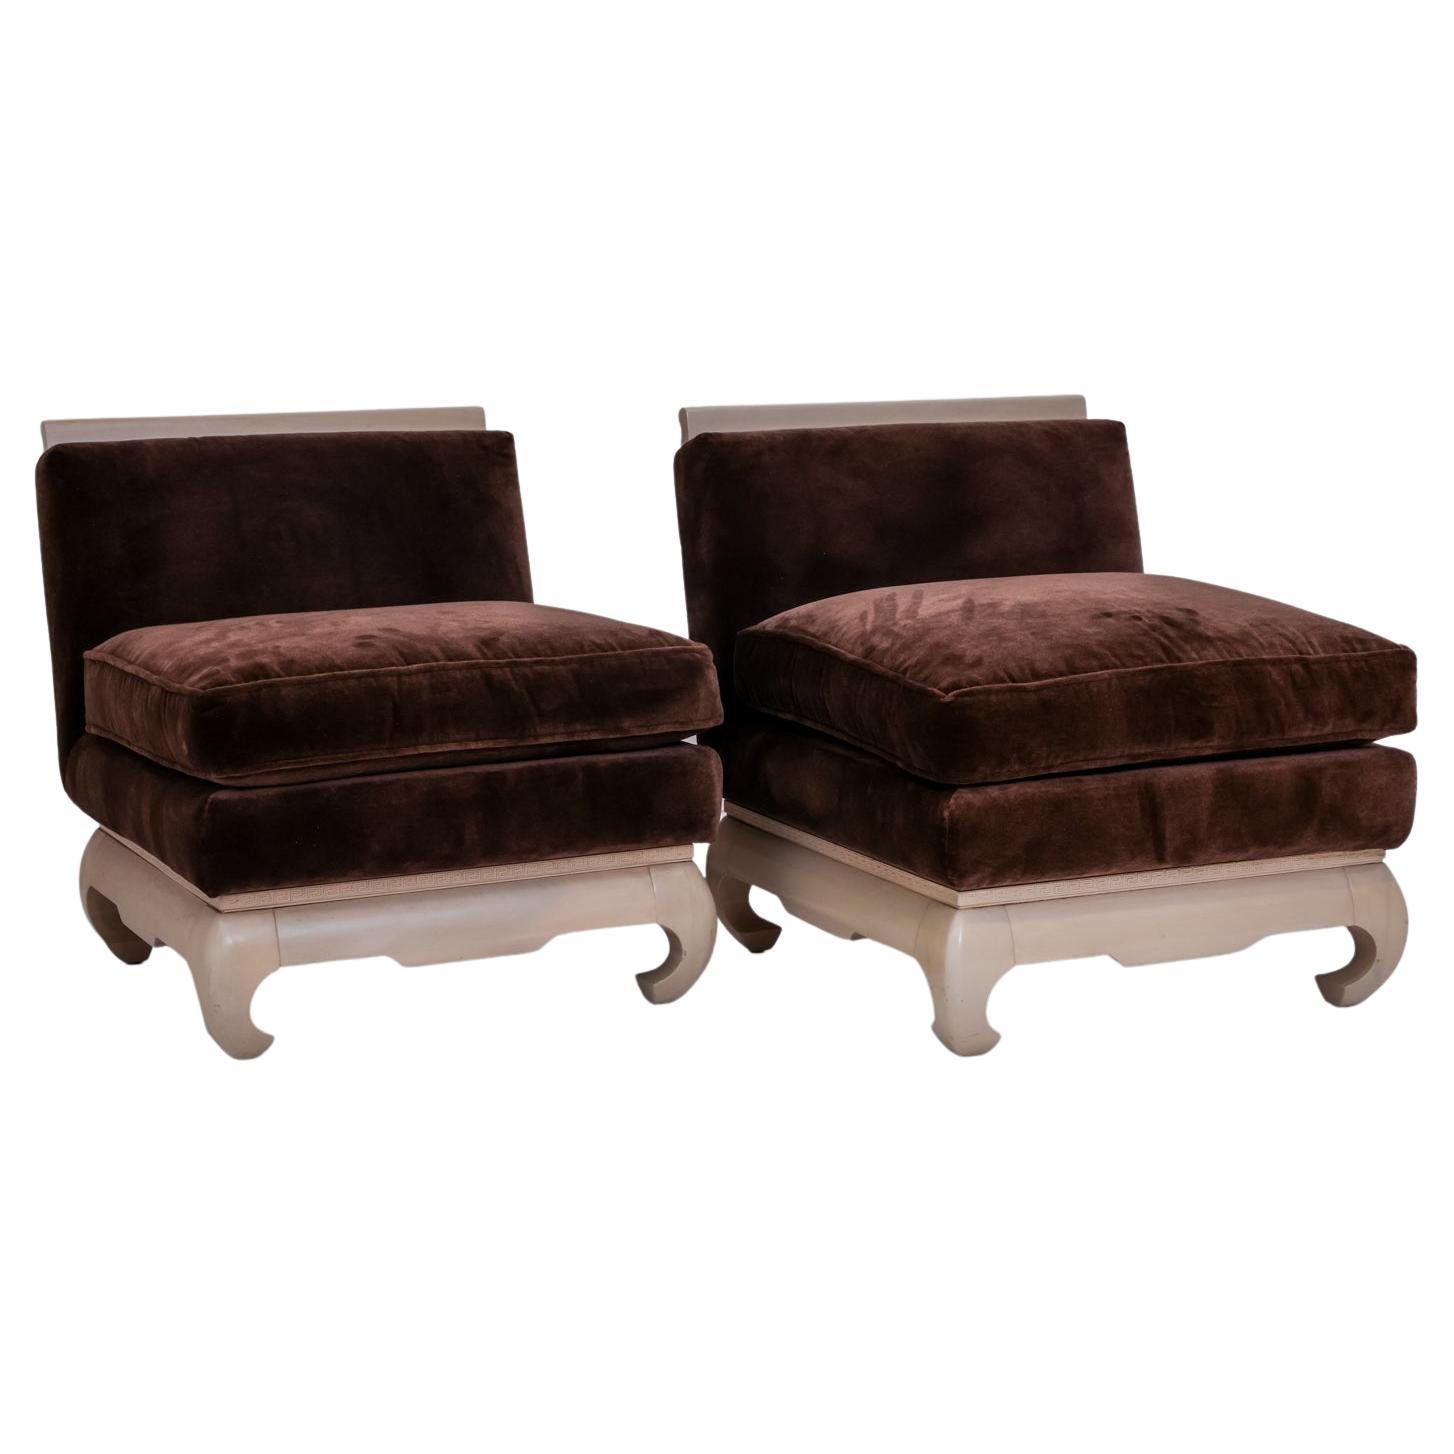 Pair of Asian Inspired Slipper Chairs with Cashmere Velvet Upholstery For Sale